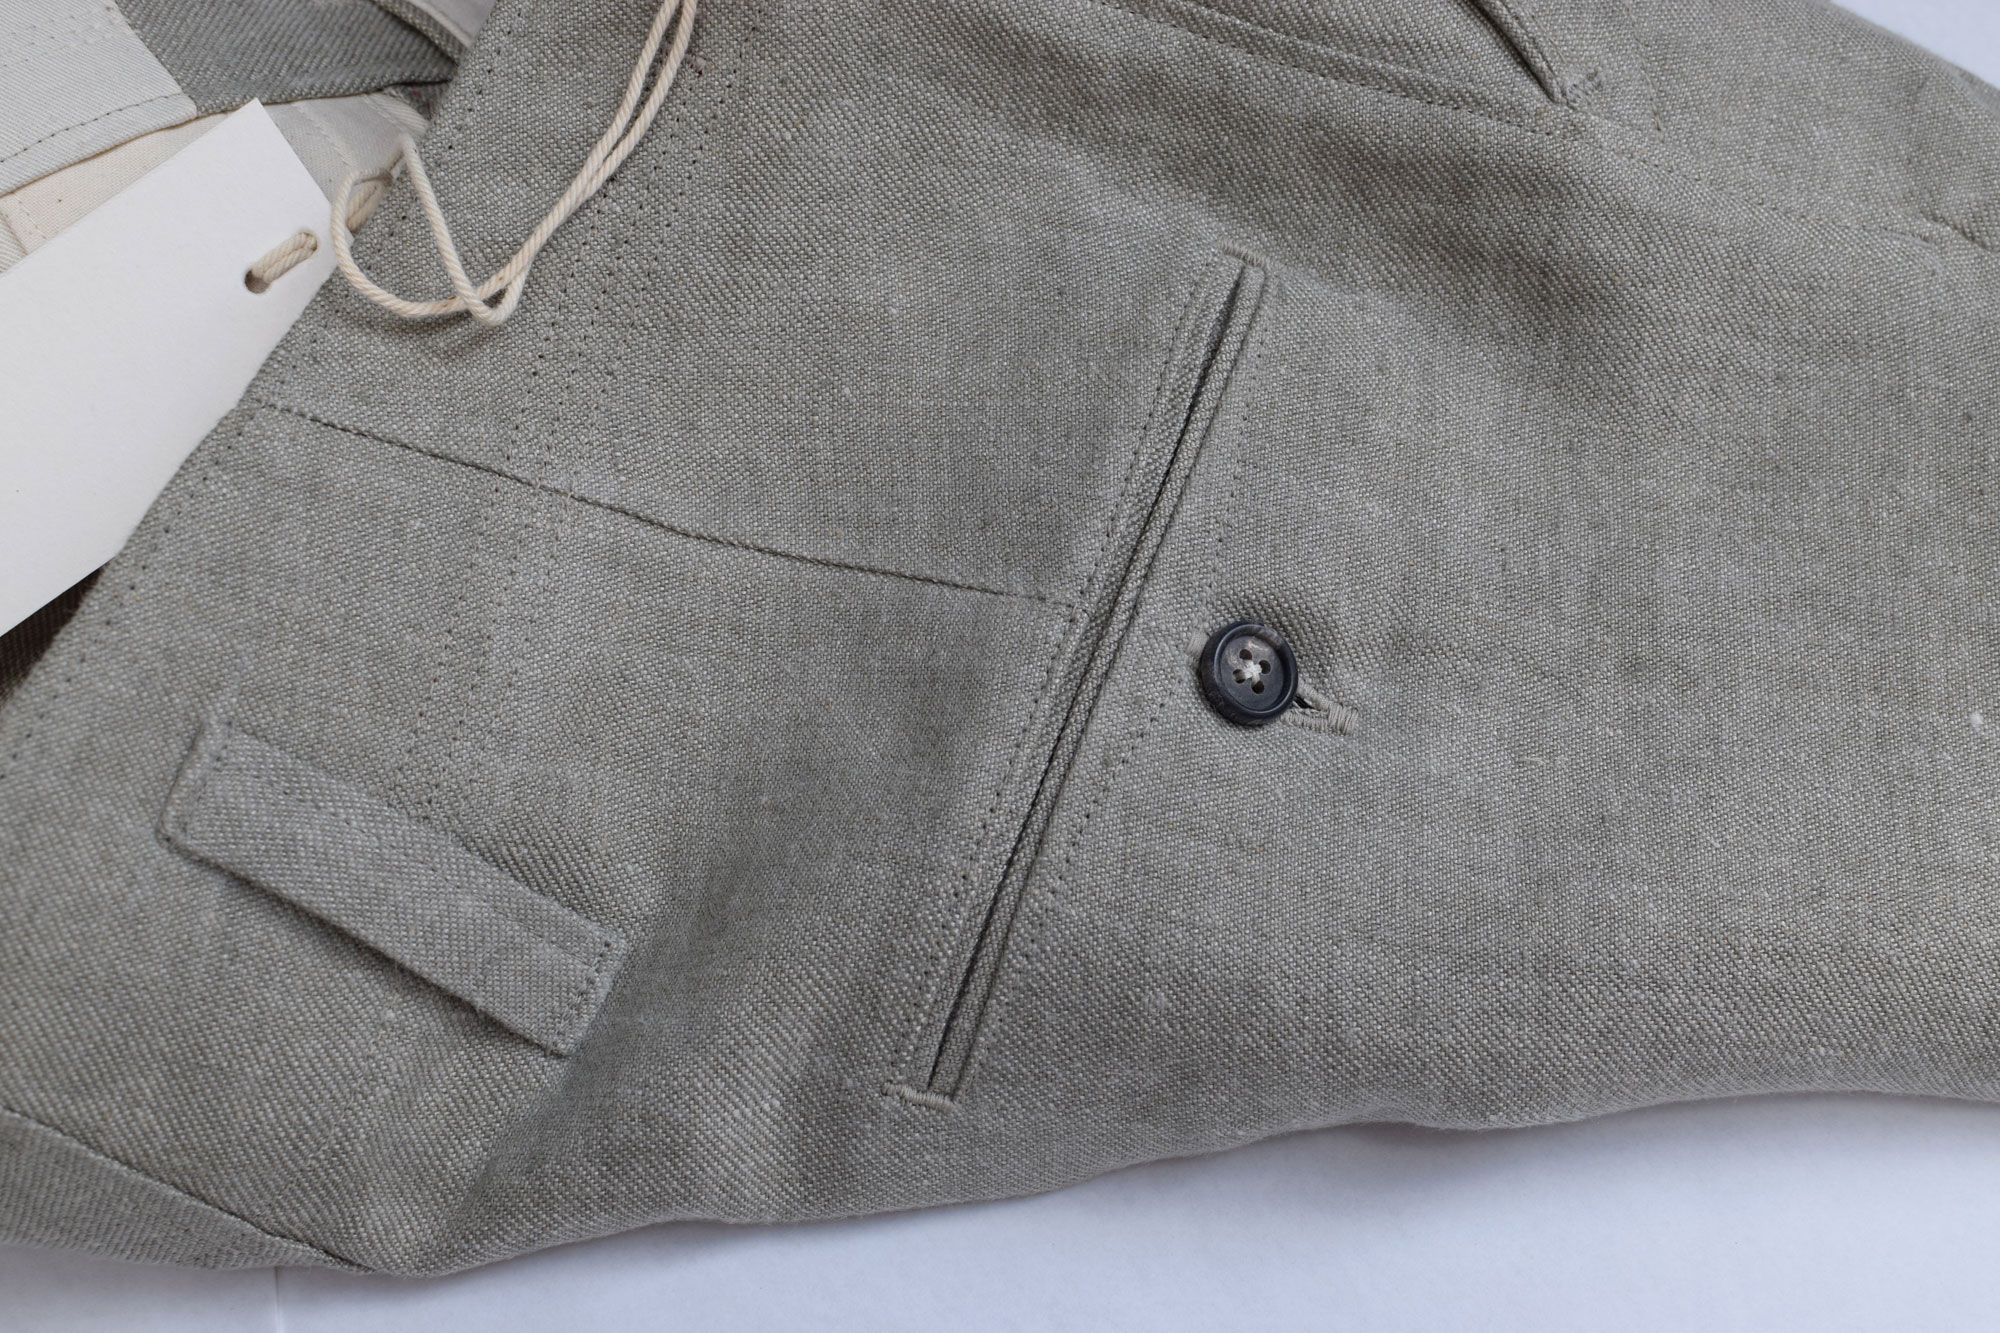 Trousers made of hemp / linen fabric by hand - made to measure.